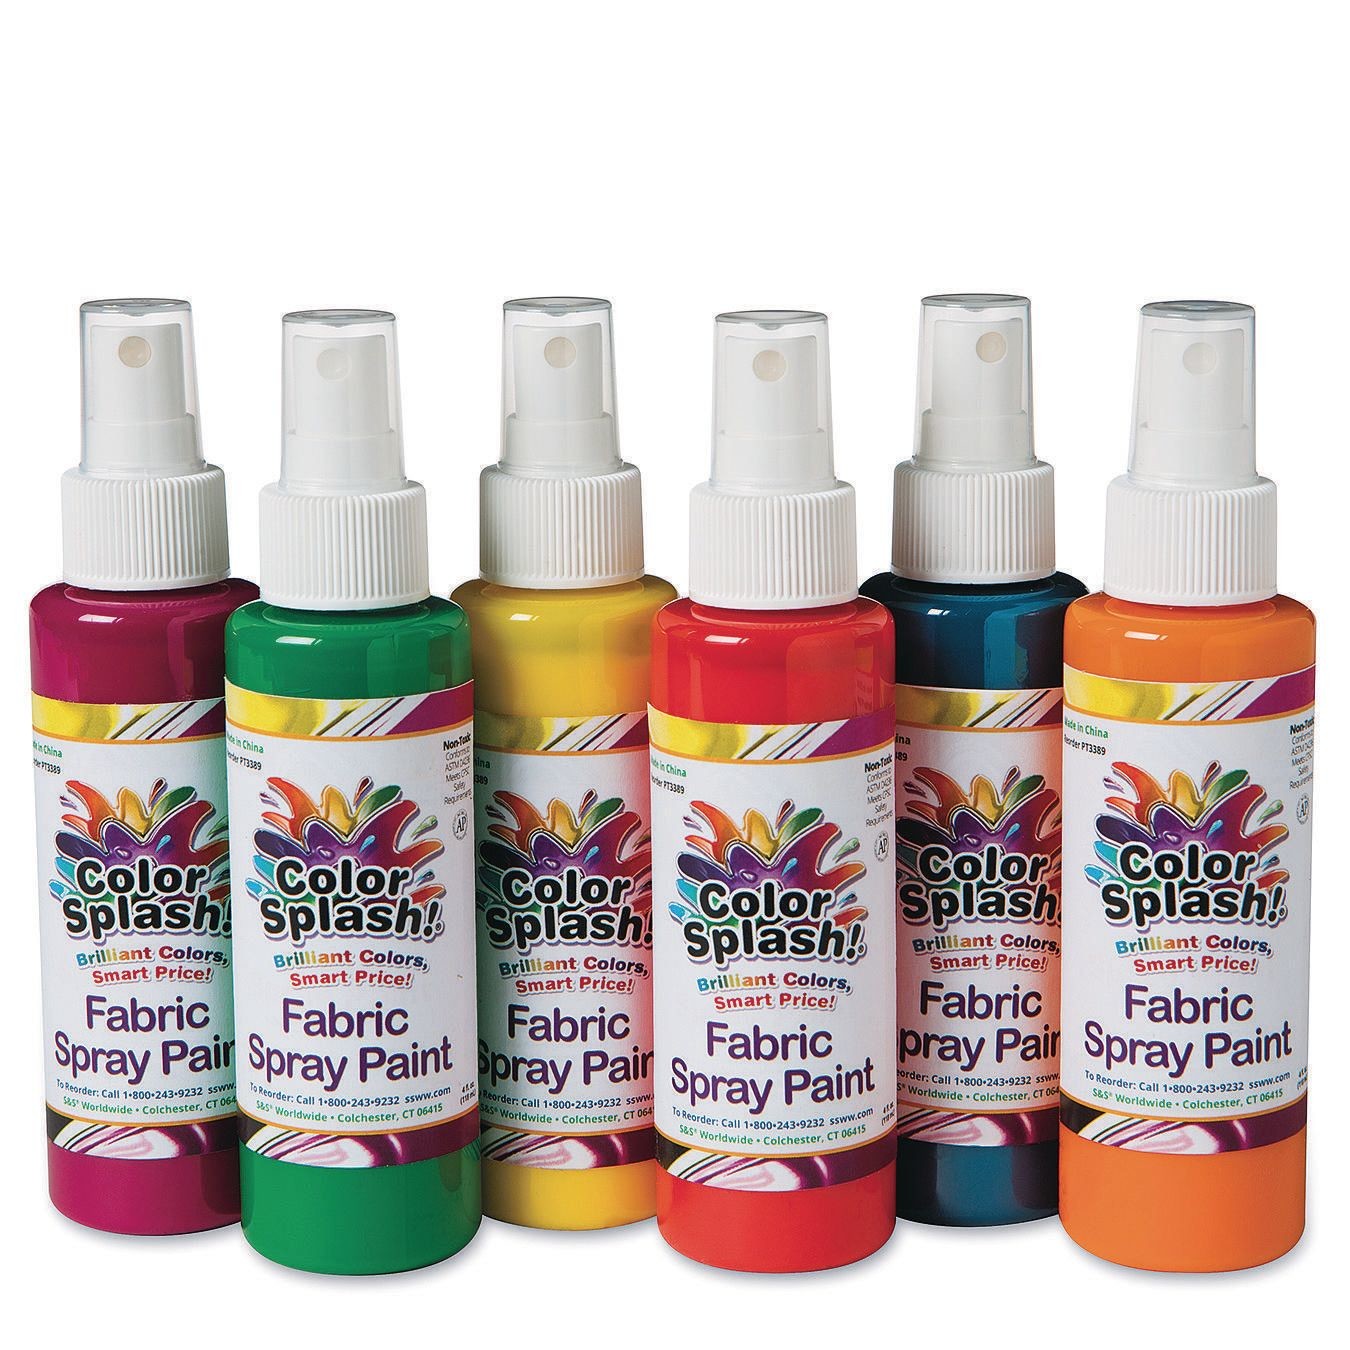  S&S Worldwide Color Splash! Fabric Paint Pen Assortment (Pack  of 60) (PT3455) : Arts, Crafts & Sewing